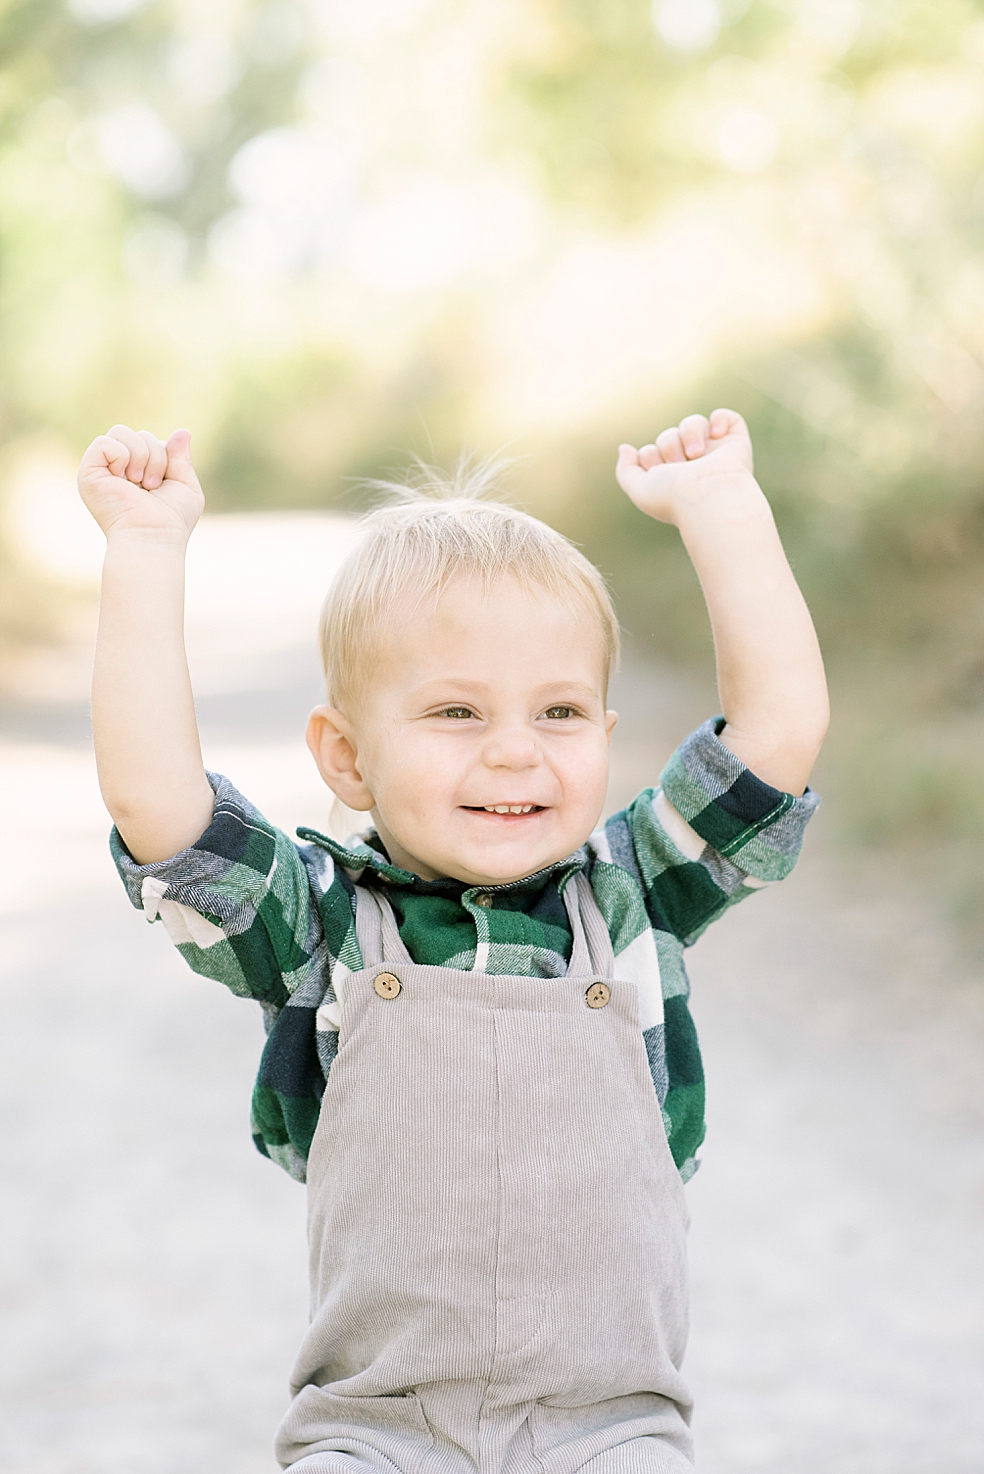 Little boy in plaid and overalls laughing | Photo by Jessica Lee Photography